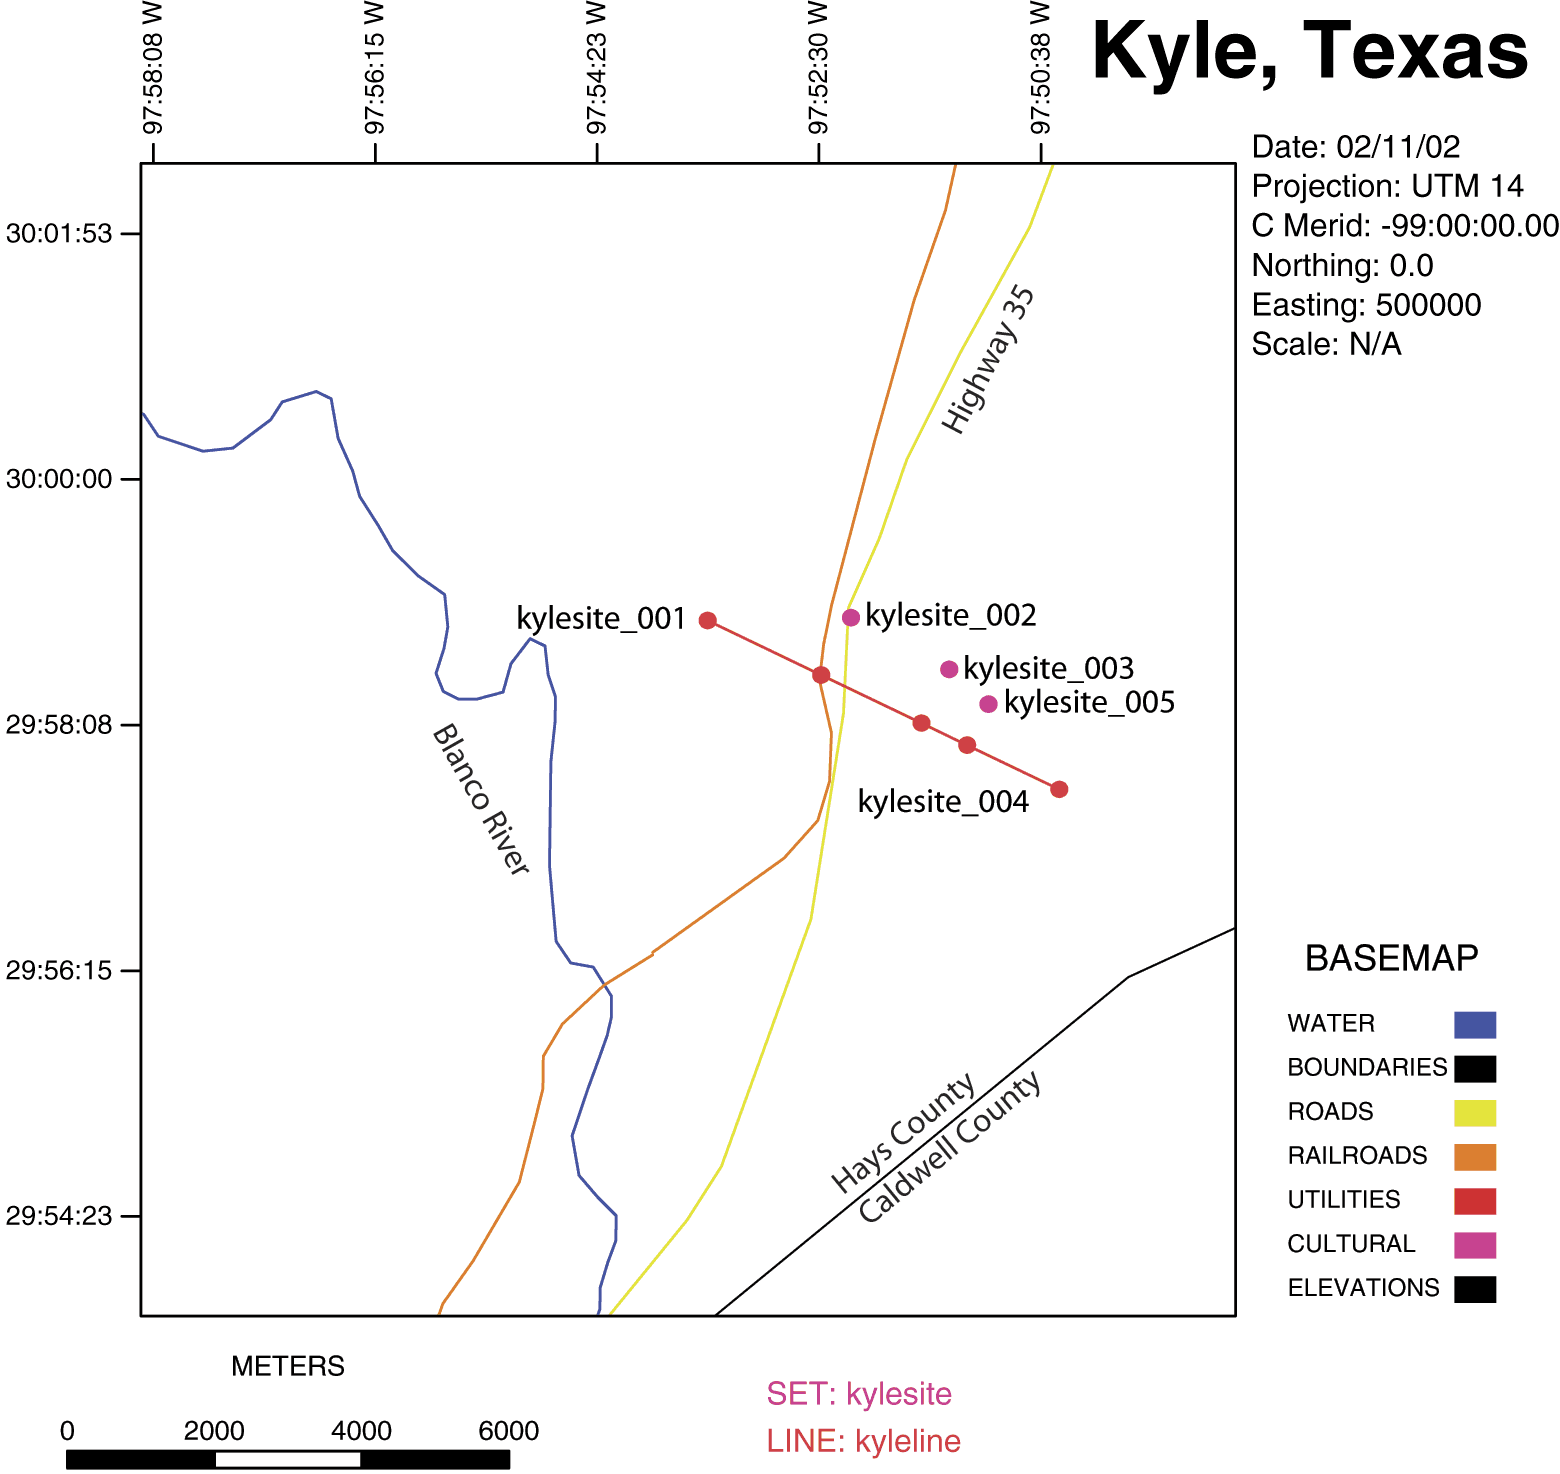 Index map to the Kyle, Texas Audio-magnetotelluric data set